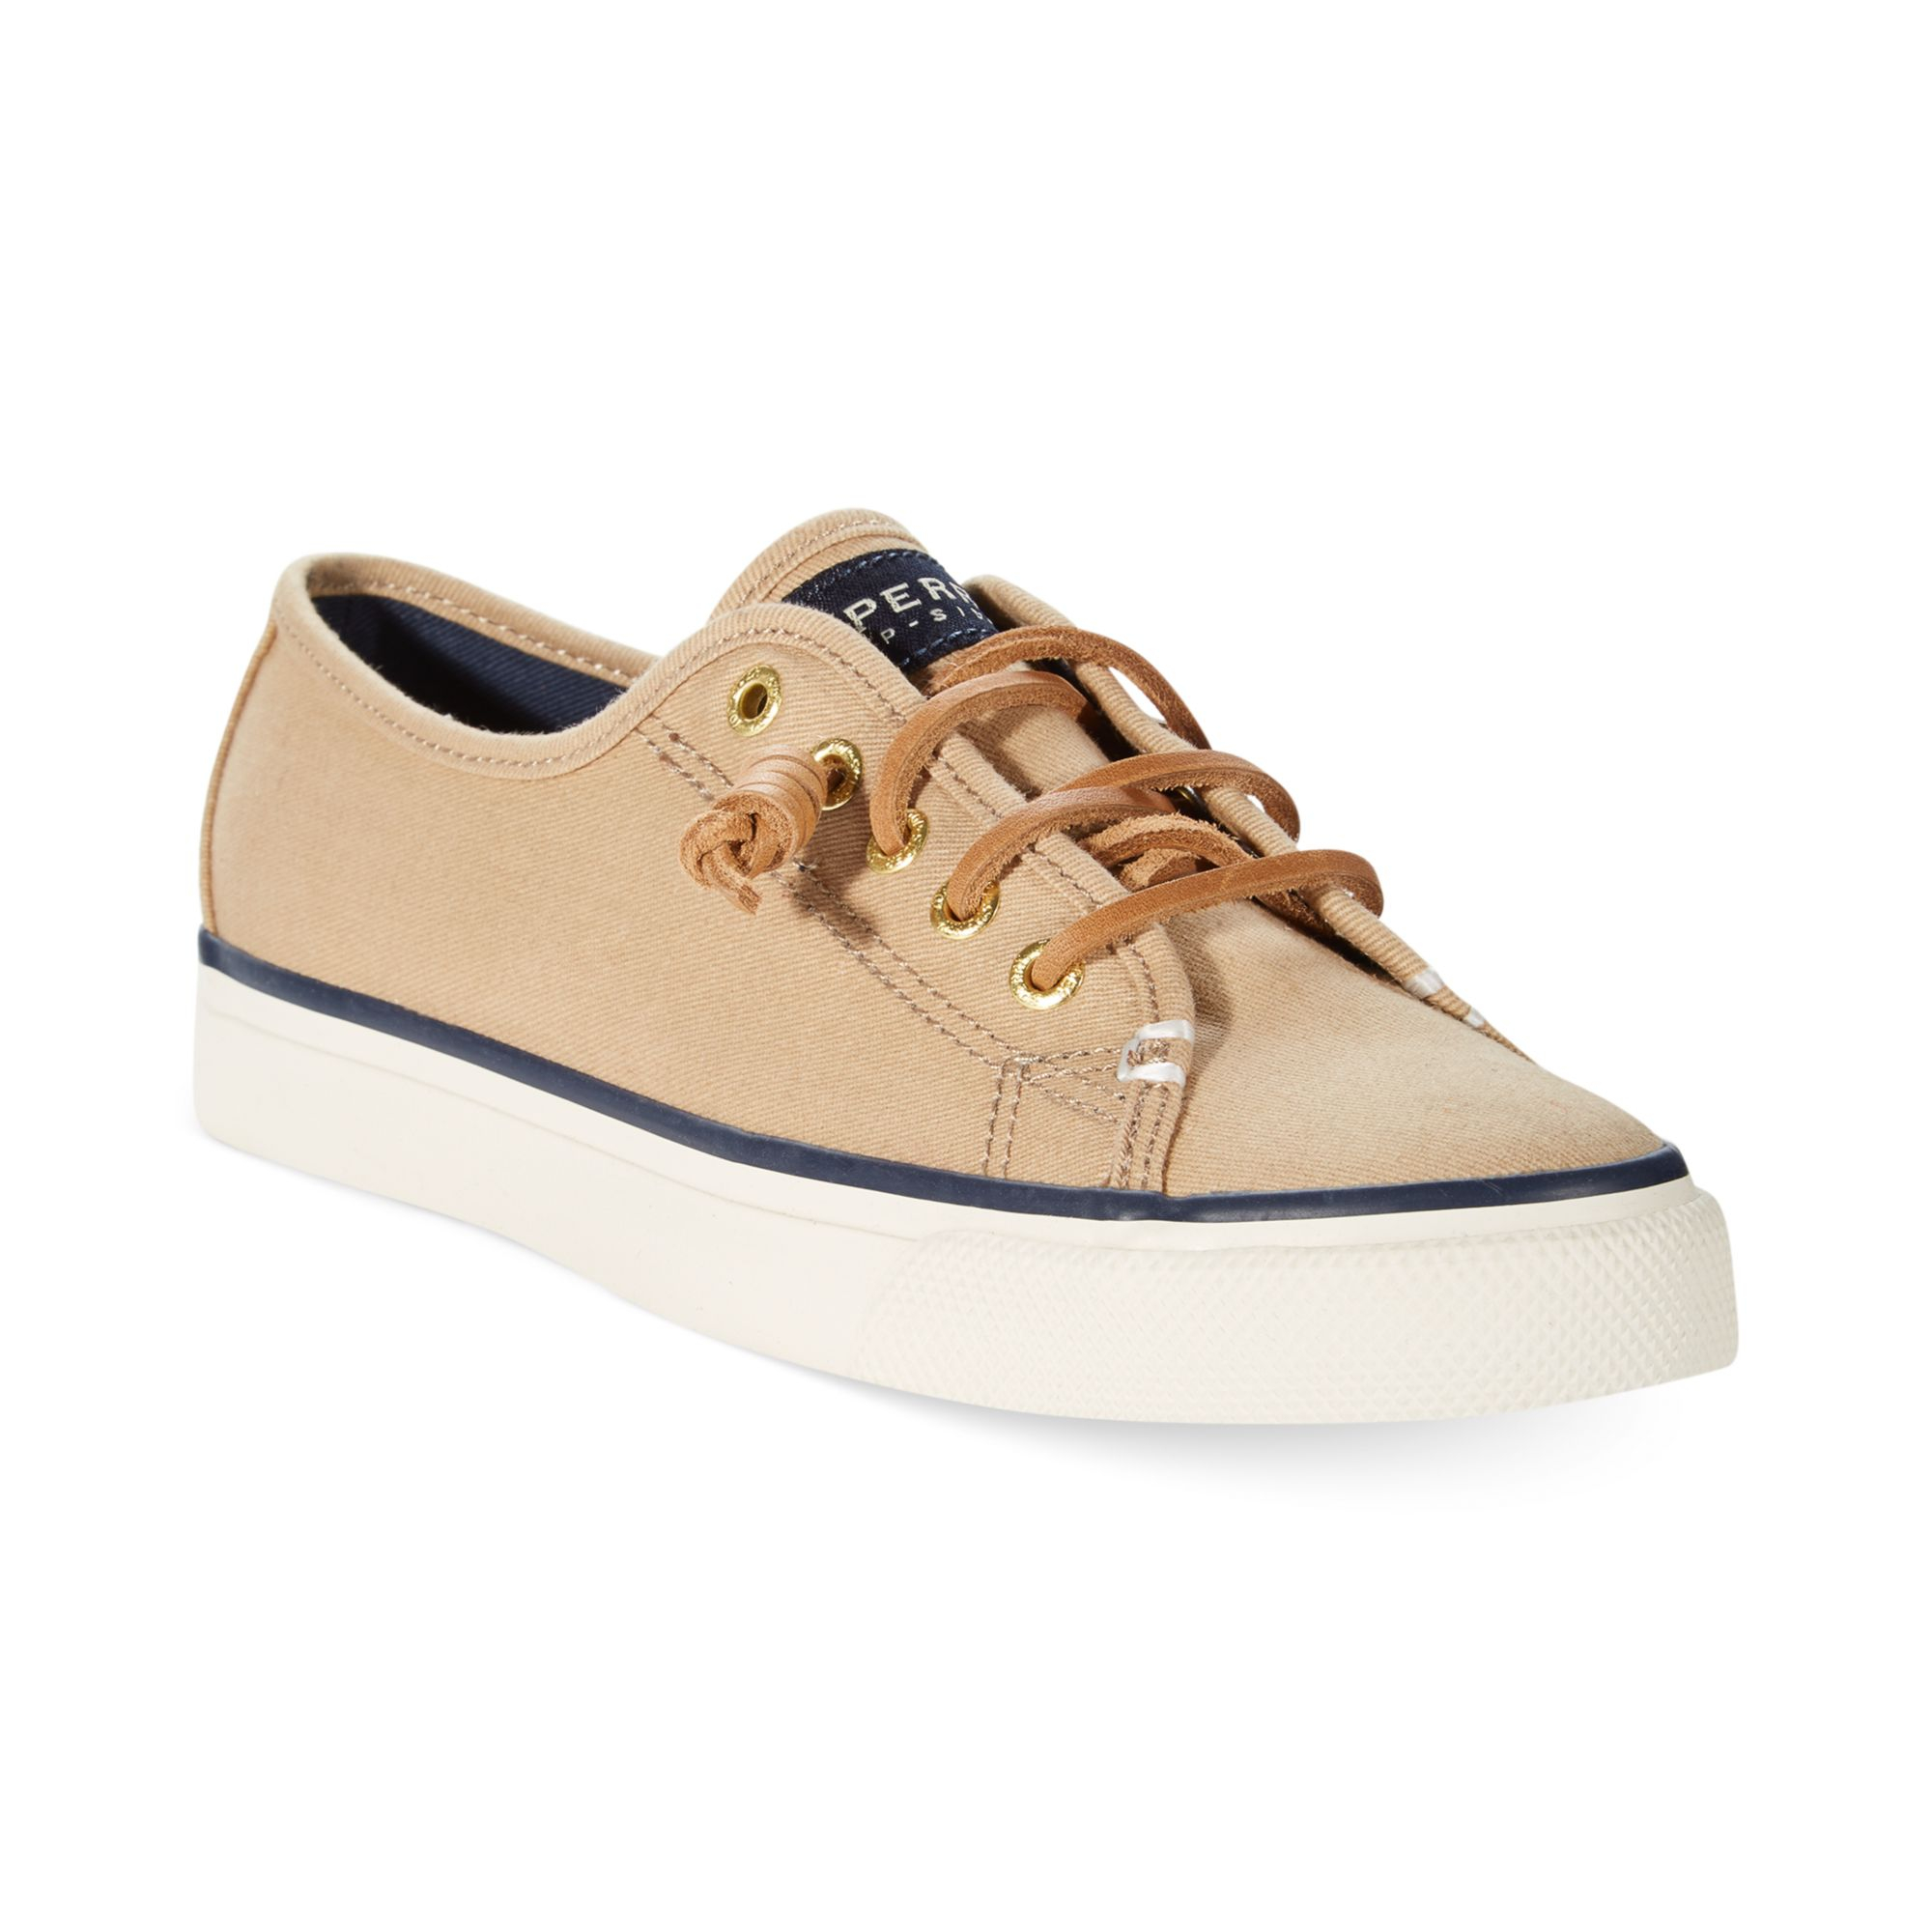 Sperry Top-sider Sperry Women'S Seacoast Canvas Sneakers in Beige (Sand ...